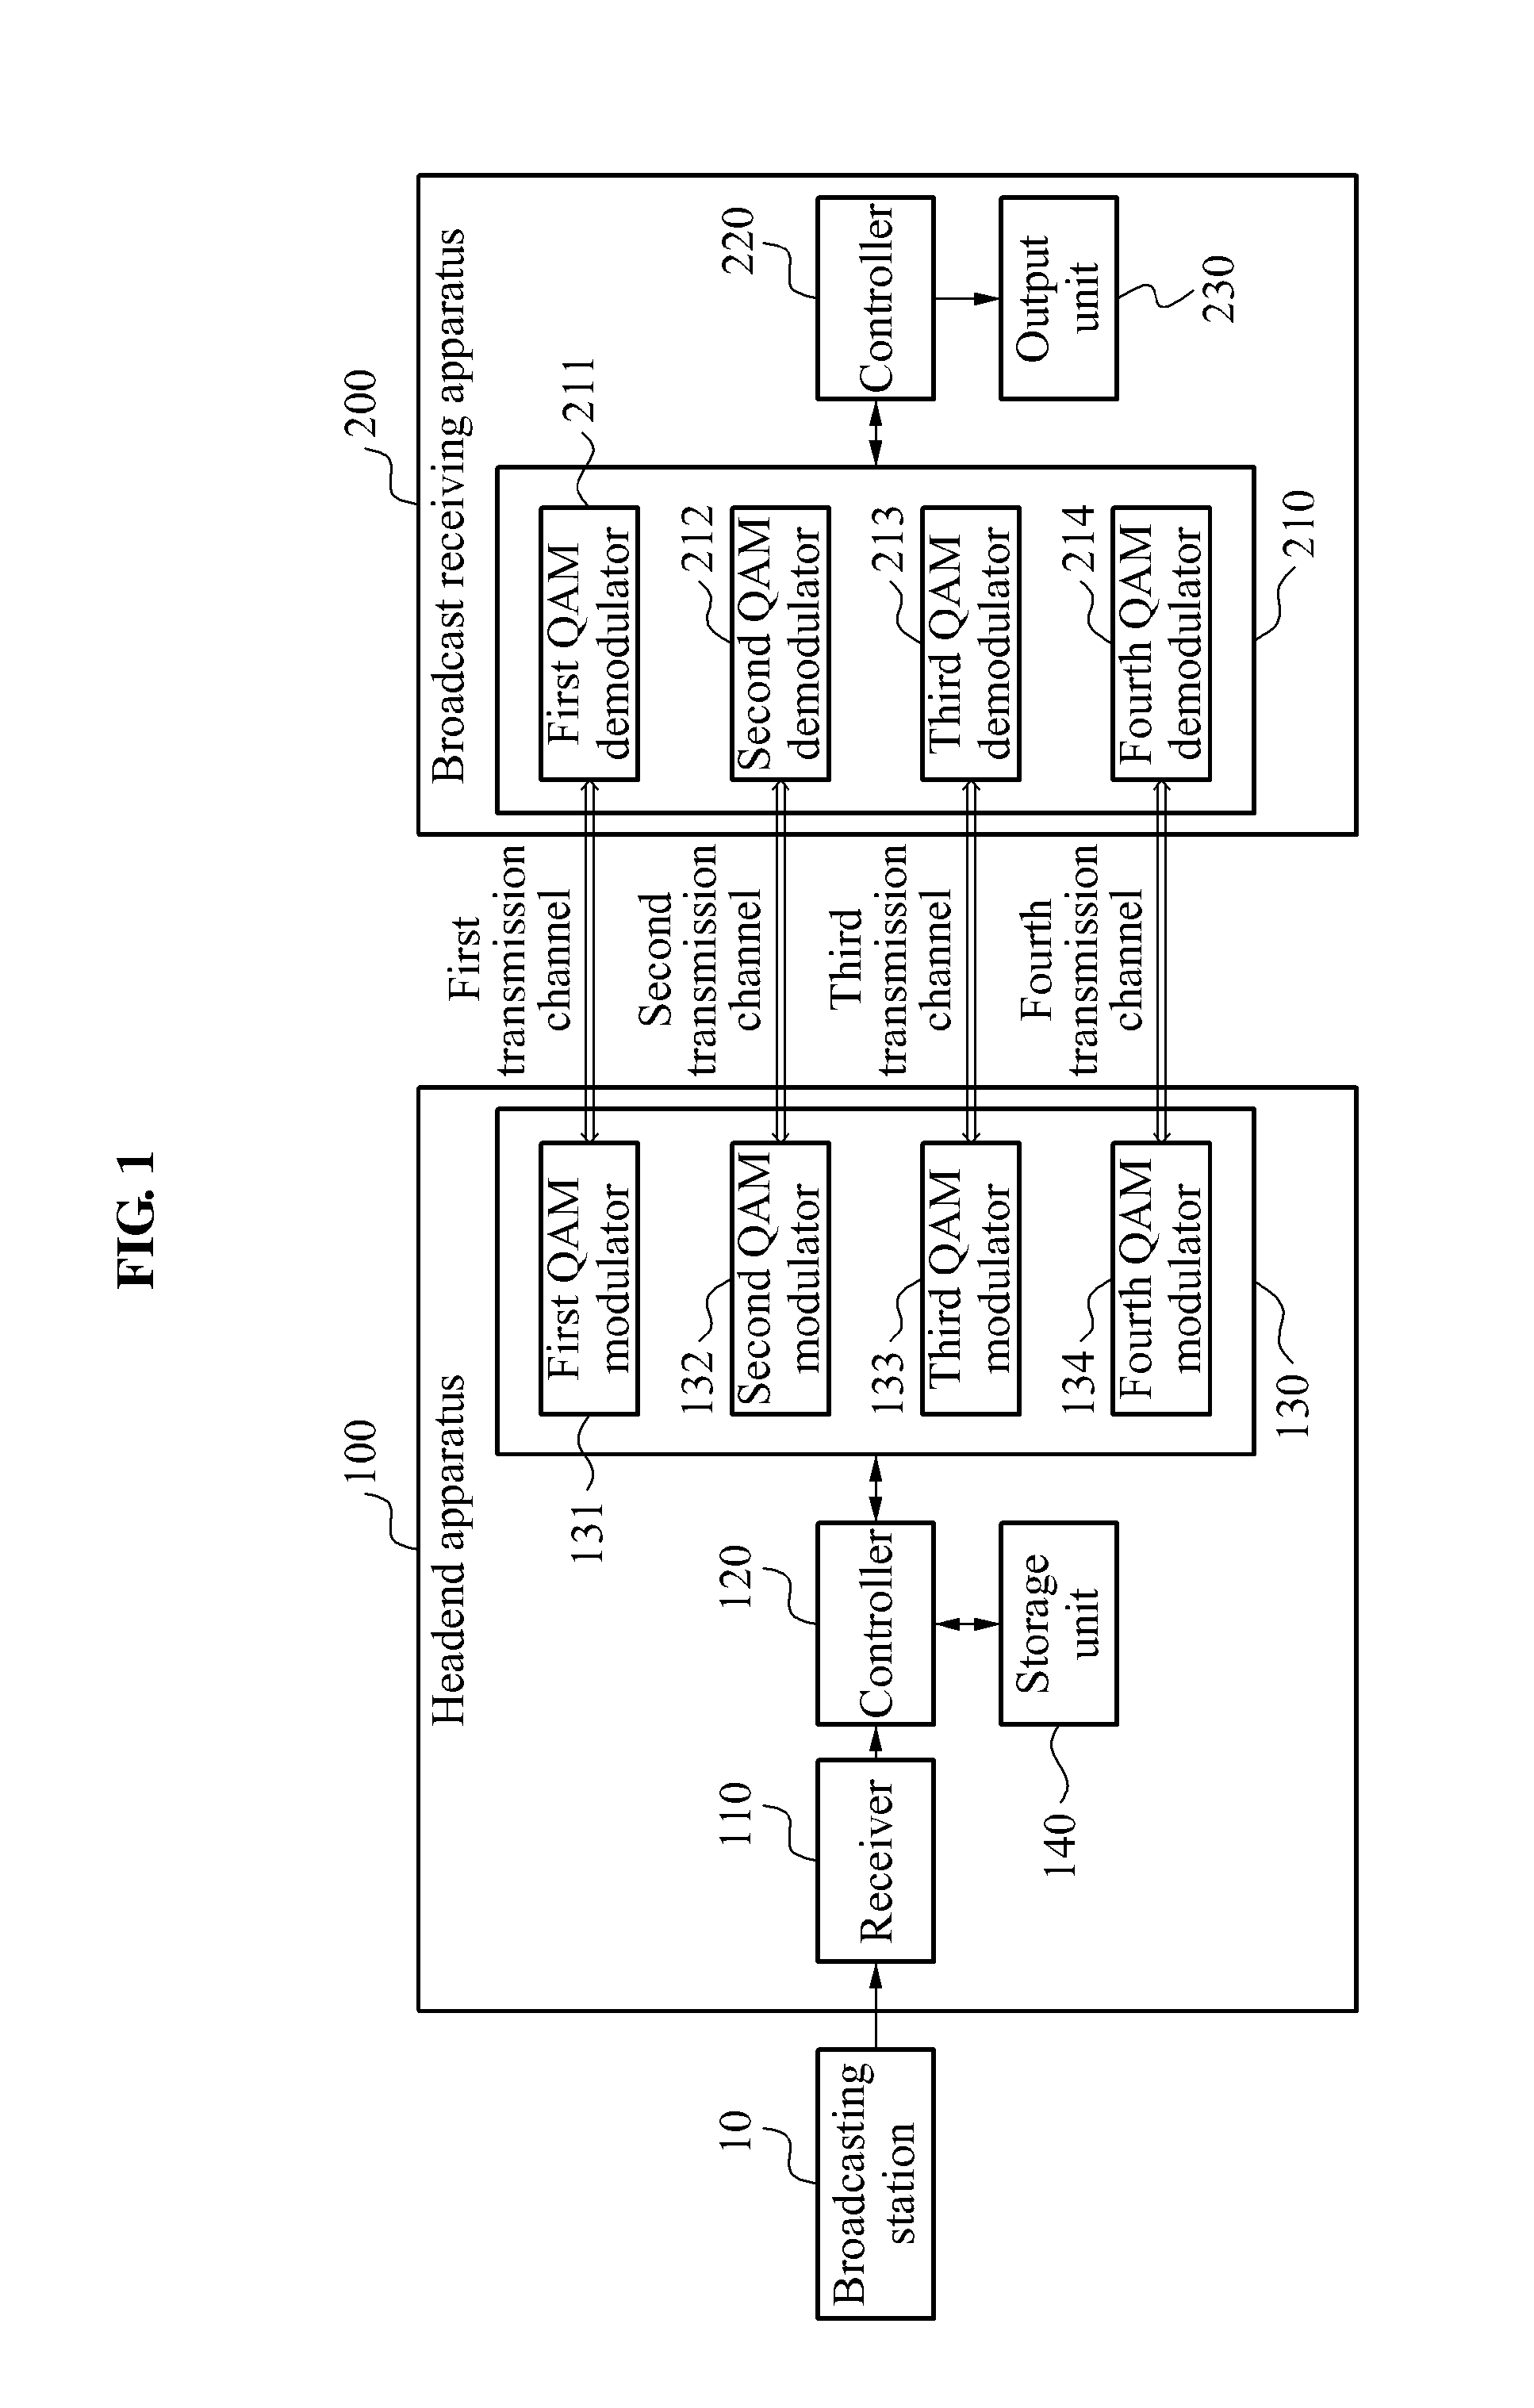 Headend apparatus for transmitting video broadcast content using channel bonding, and broadcast receiving apparatus and method for receiving video broadcast content